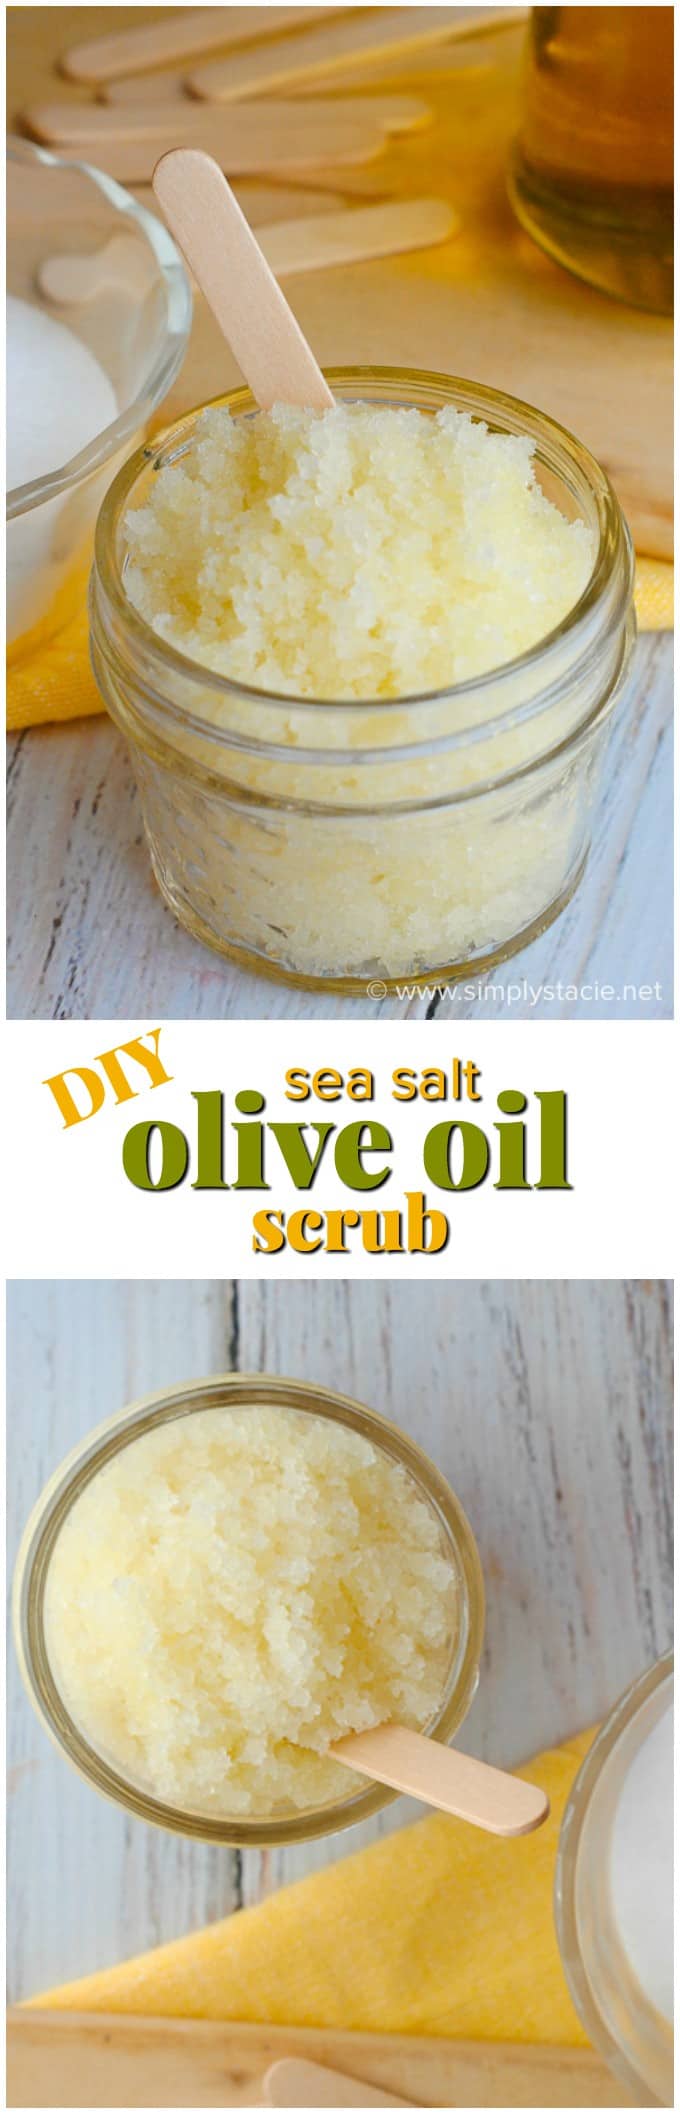 Sea Salt & Olive Oil Scrub - Your skin will feel glorious with this DIY scrub! It's easy to make with pantry ingredients and makes a great gift.